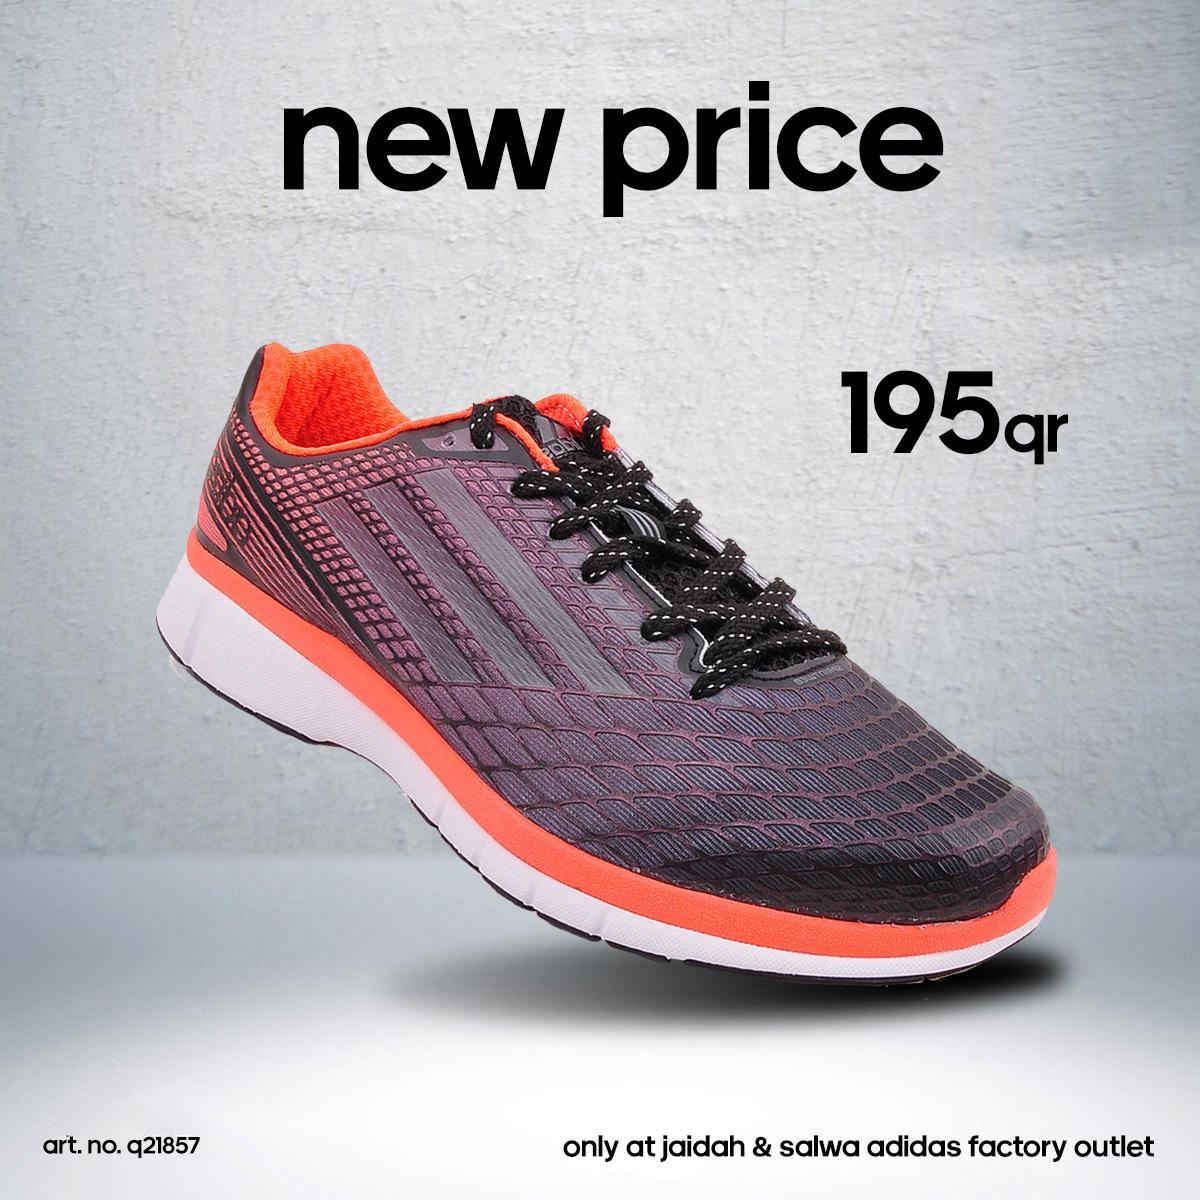 Chicle Golpe fuerte Inmigración Sports Corner on Twitter: "#ADIDAS Mens #adizero 3M #running shoes for NEW  PRICE only 195QR @ Jaidah and Salwa Adidas Factory Outlets #Qatar  http://t.co/zBPX2o2Zyd" / Twitter